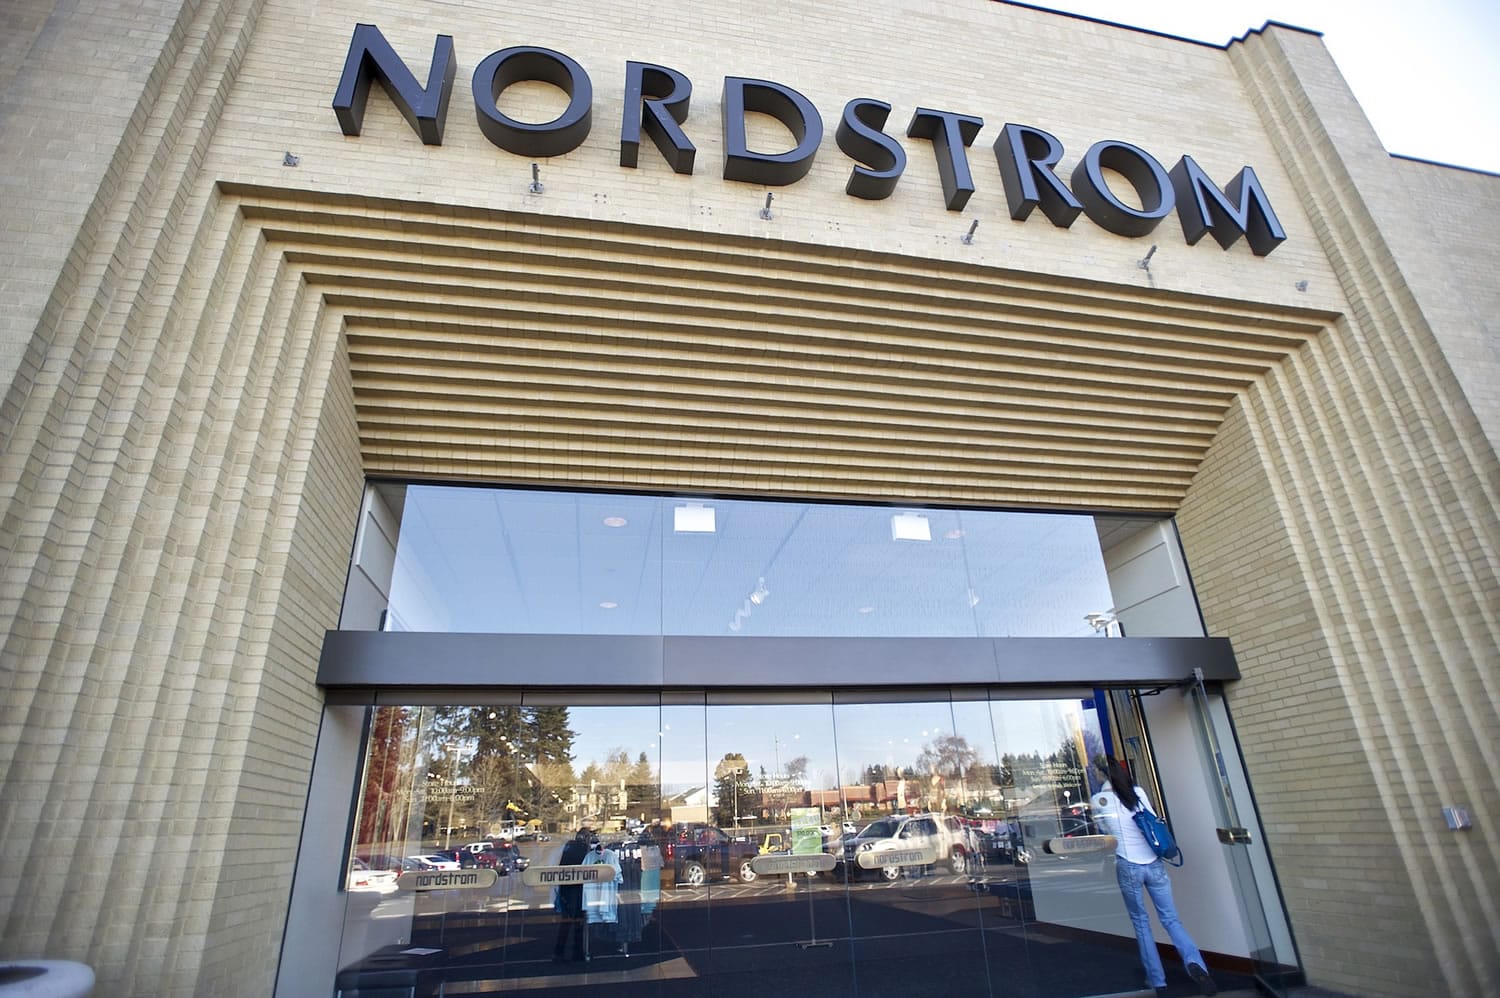 Gold's Gym going into Nordstrom space at Vancouver mall - The Columbian